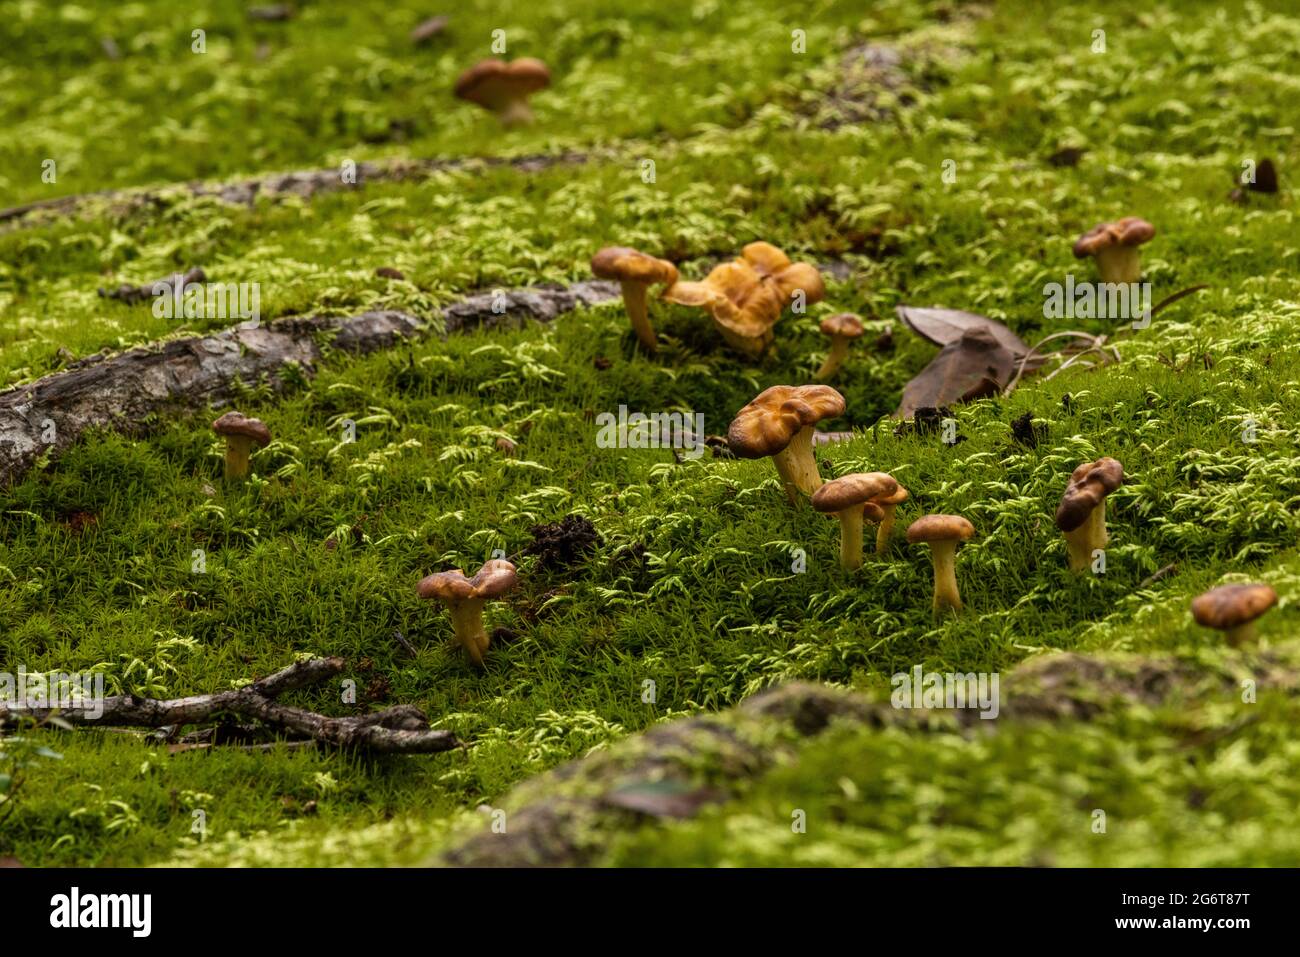 Mushrooms sprout from the mossy ground under a live oak in Fairhope, Alabama. Stock Photo